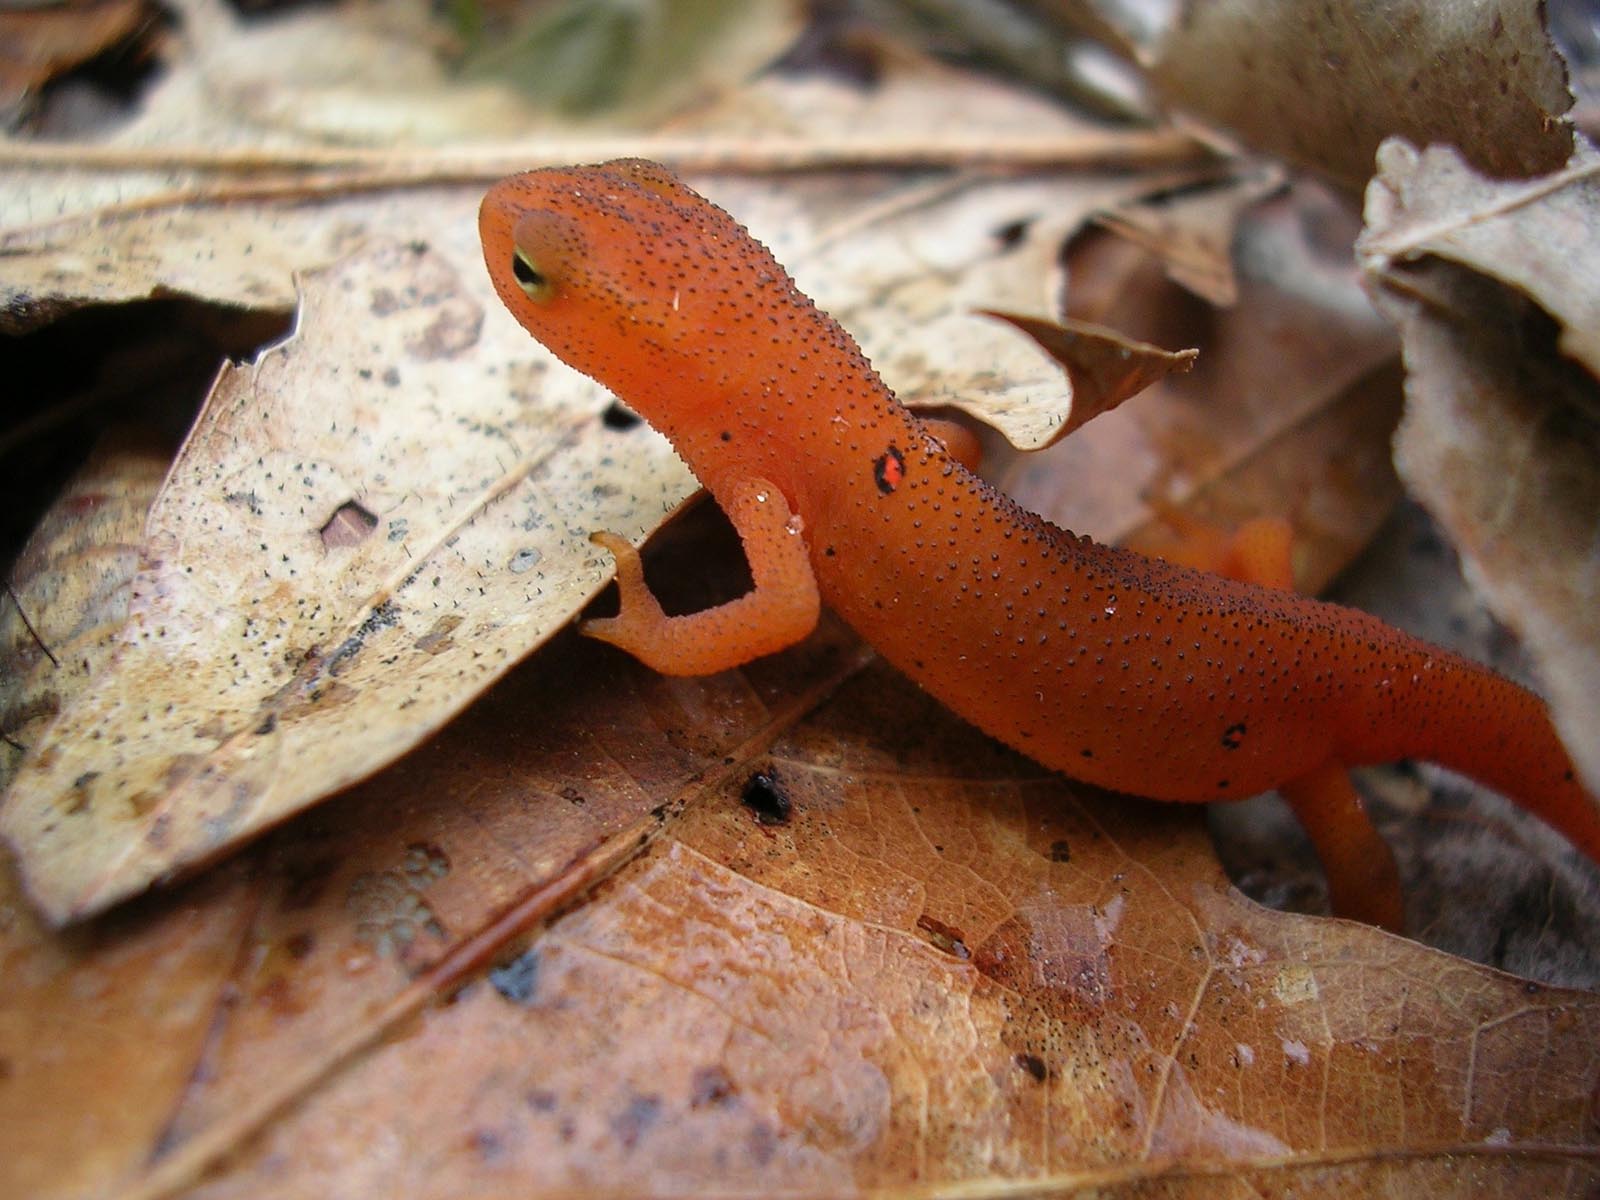 Red Spotted Newt | Photo Credit: Skeeze